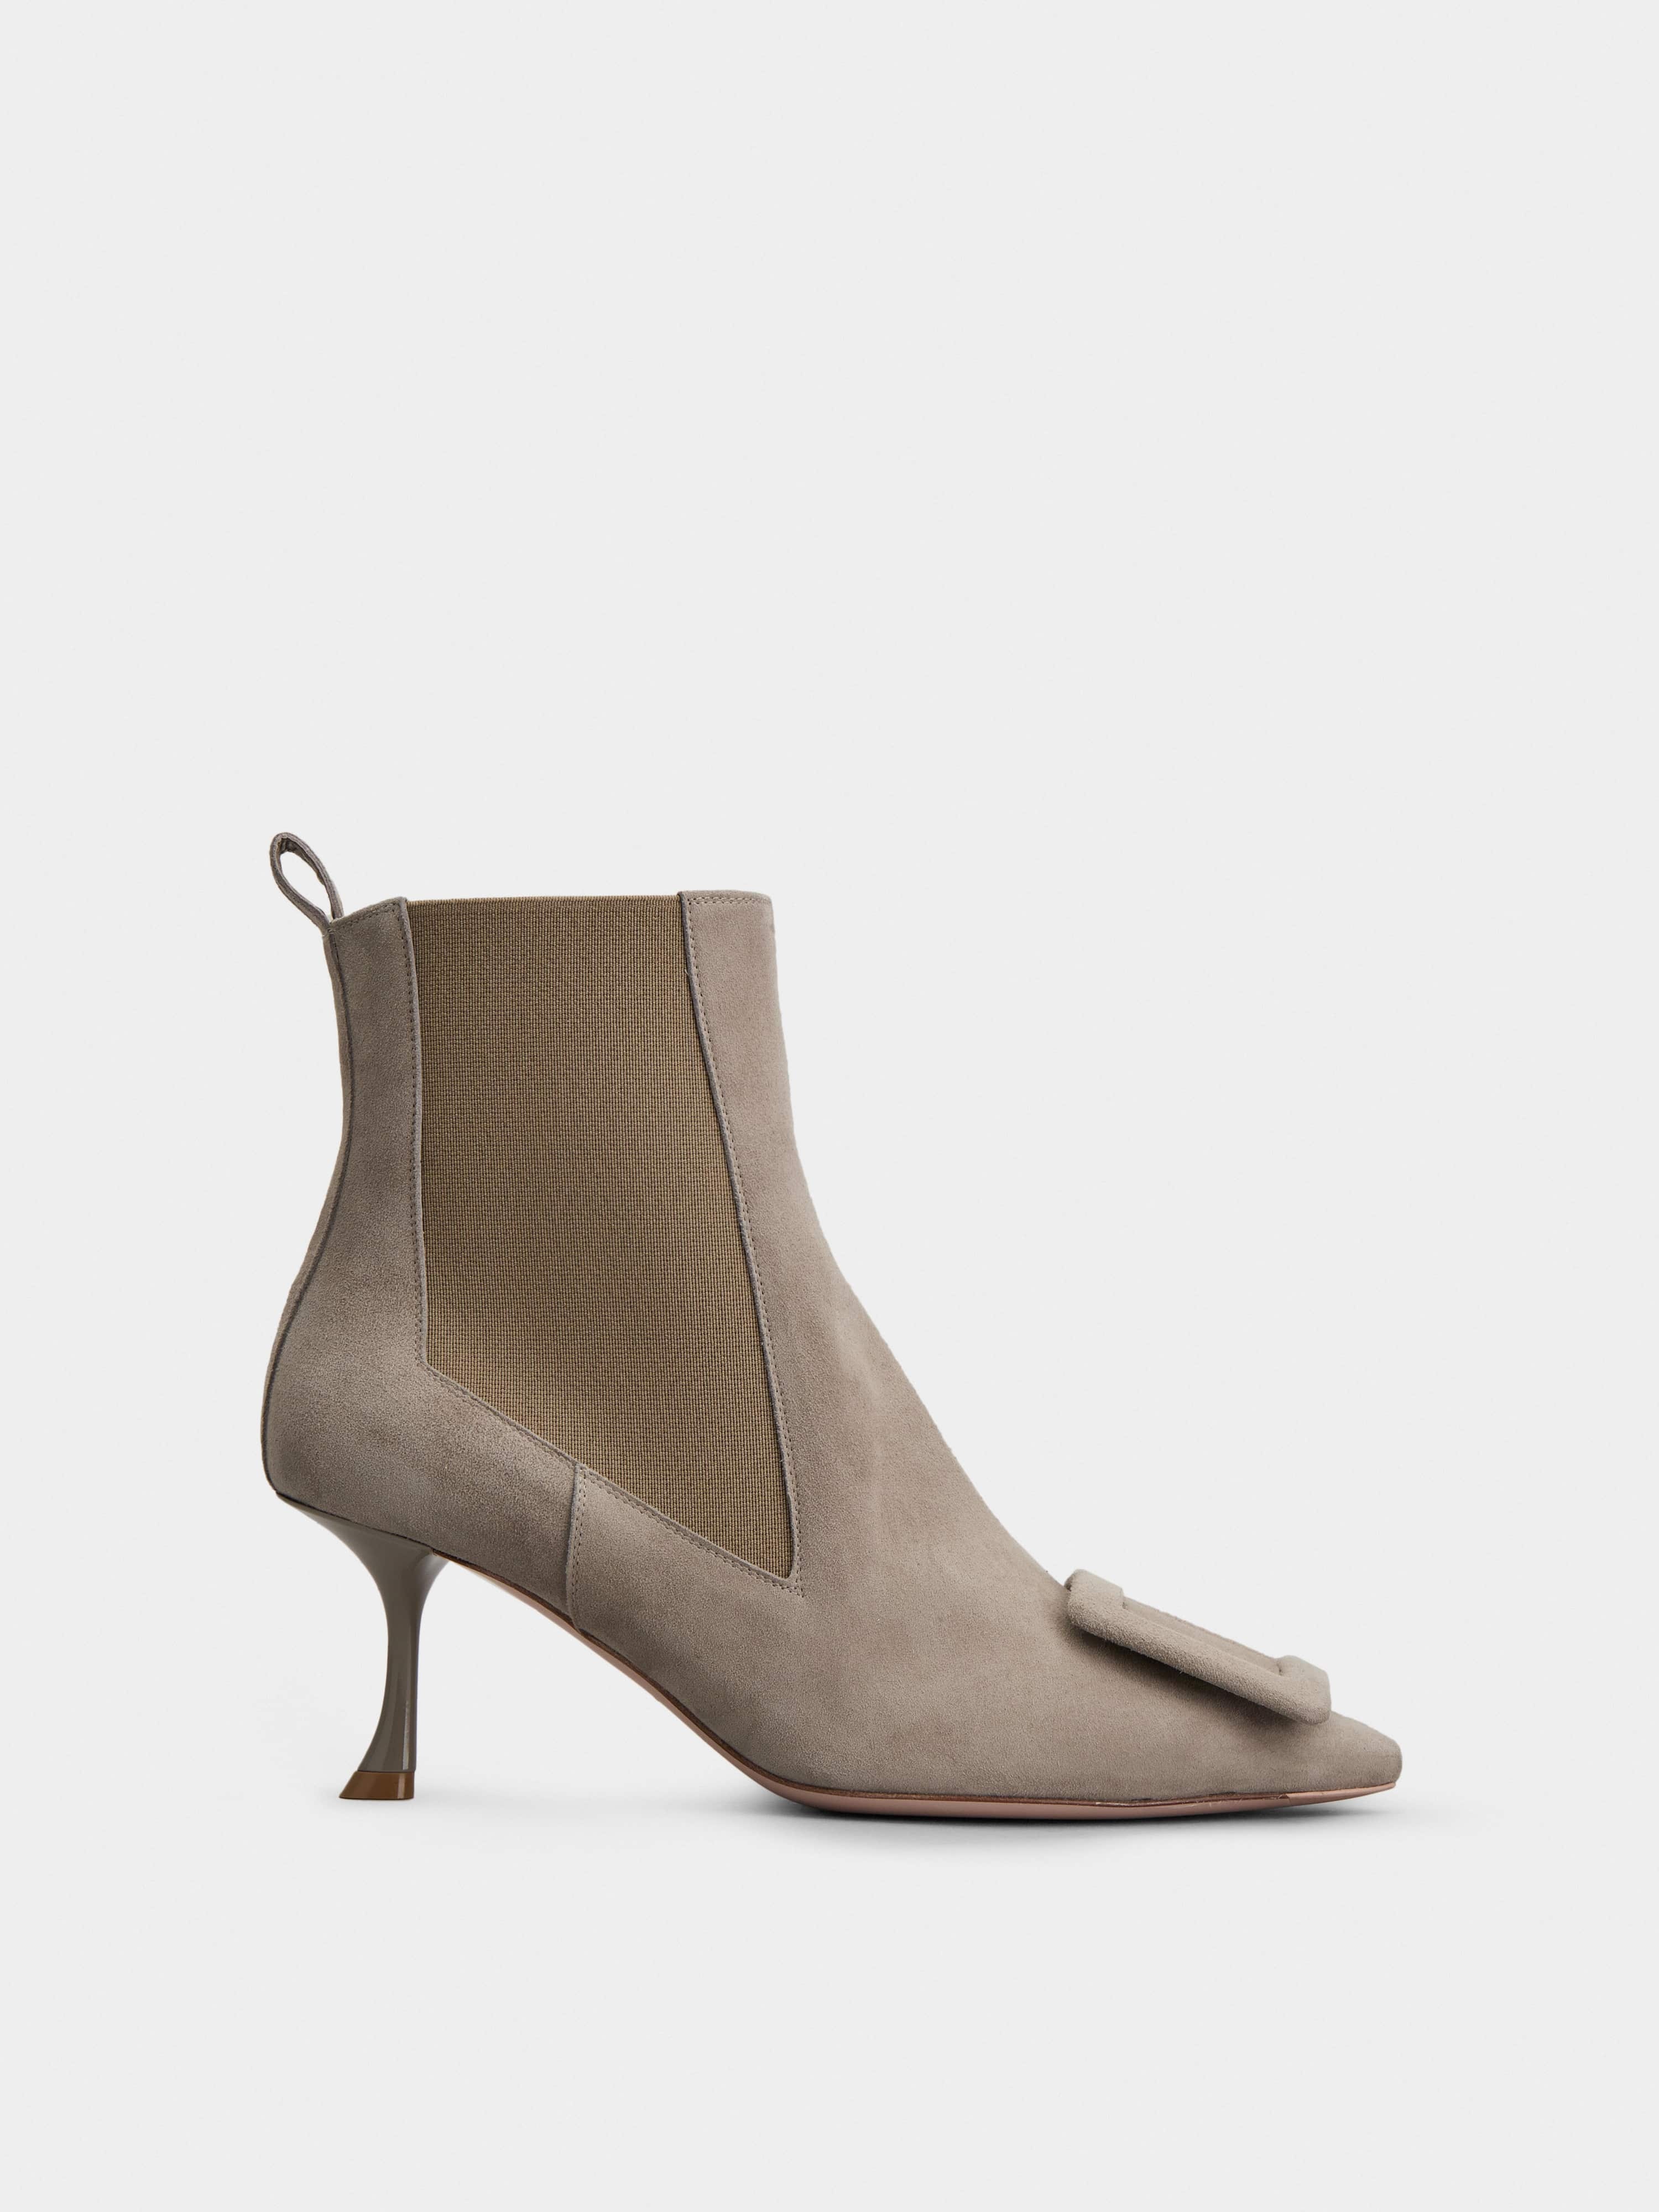 Viv' in The City Booties in Suede - 1